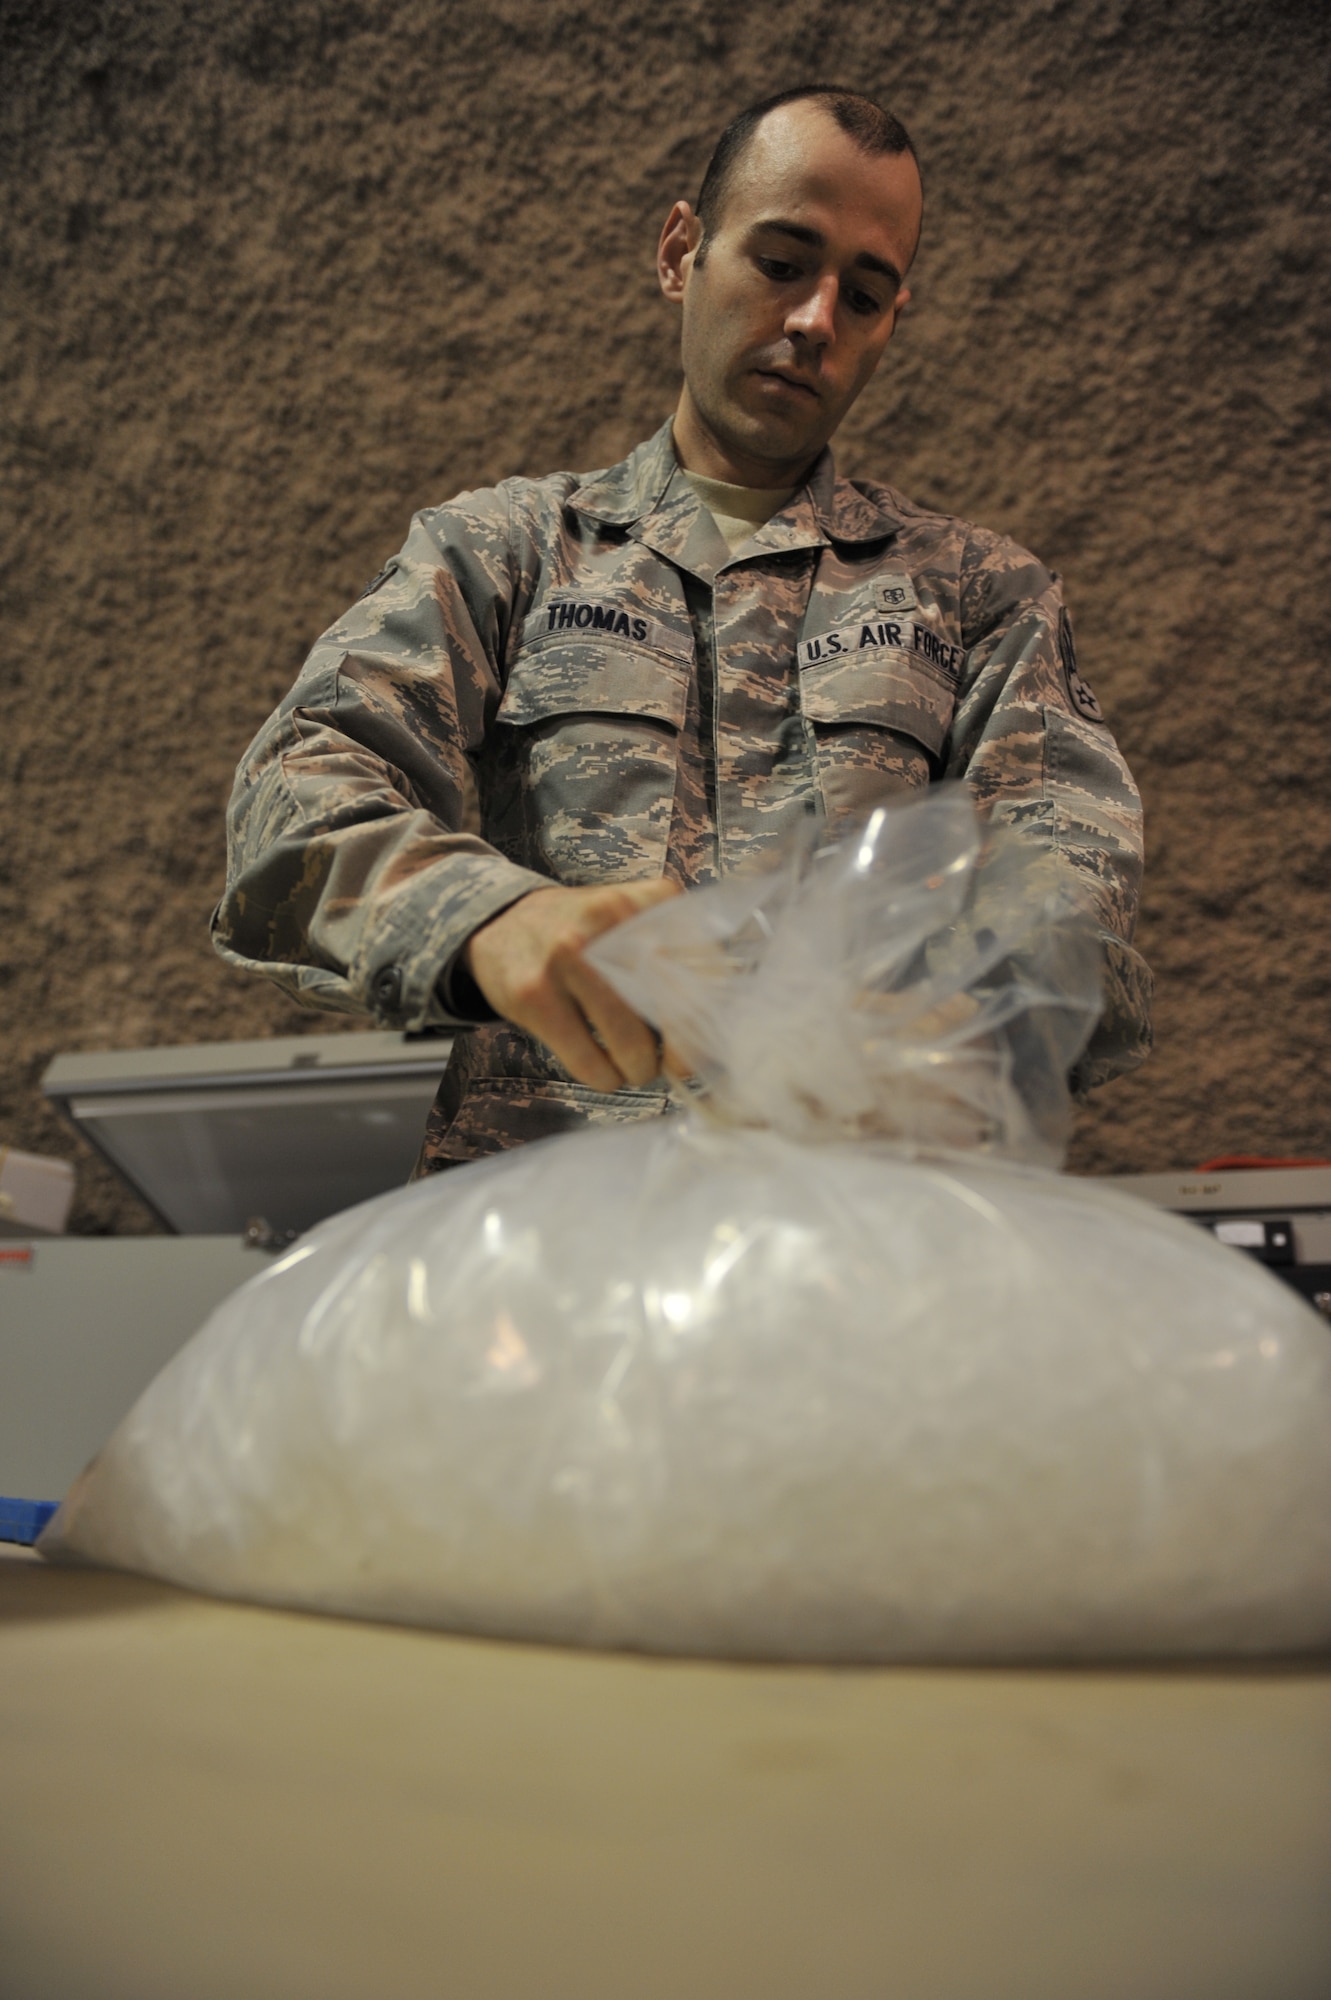 Senior Airman Charles Thomas bags ice for a blood product shipment at the 379th Expeditionary Medical Group Blood Transshipment Center, Al Udeid Air Base, Qatar, Jan. 17, 2014. The BTC serves as the central point for storage and inventory assessment of all blood products in Central Command’s area of responsibility. The BTC ships an average of 600 blood products weekly supporting 43 medical treatment facilities throughout the AOR. Thomas is a medical laboratory technician deployed from Joint Base Langley-Eustis, Va., and a Birmingham, Ala., native. (U.S. Air Force photo by Master Sgt. David Miller)